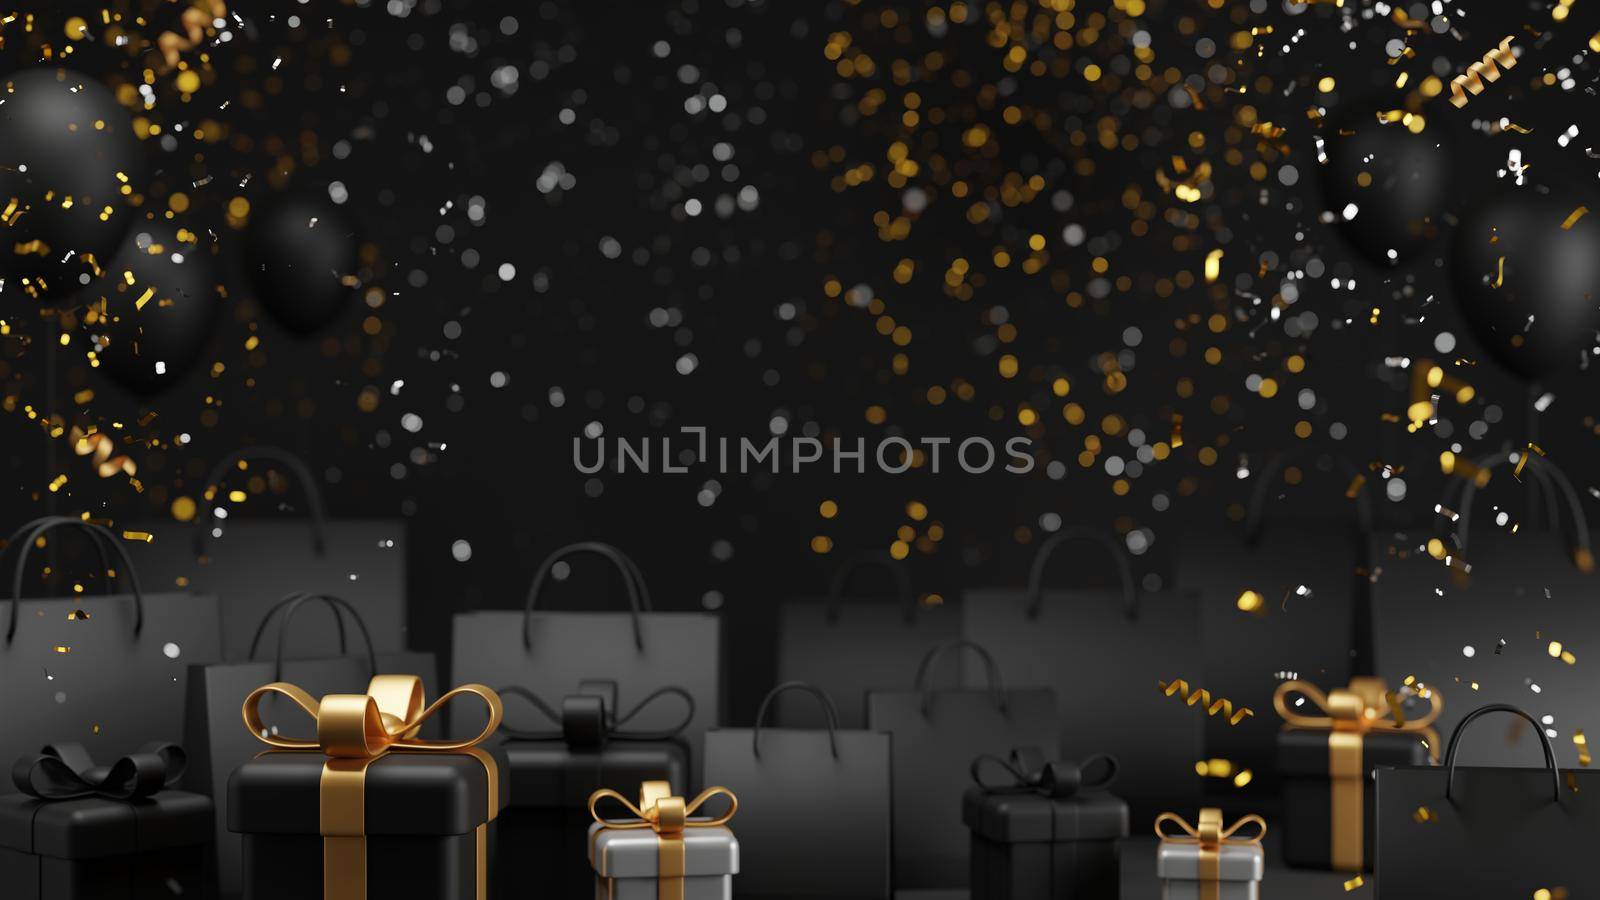 Black friday sale banner design of gift box and shopping bag with confetti falling 3d render by Myimagine